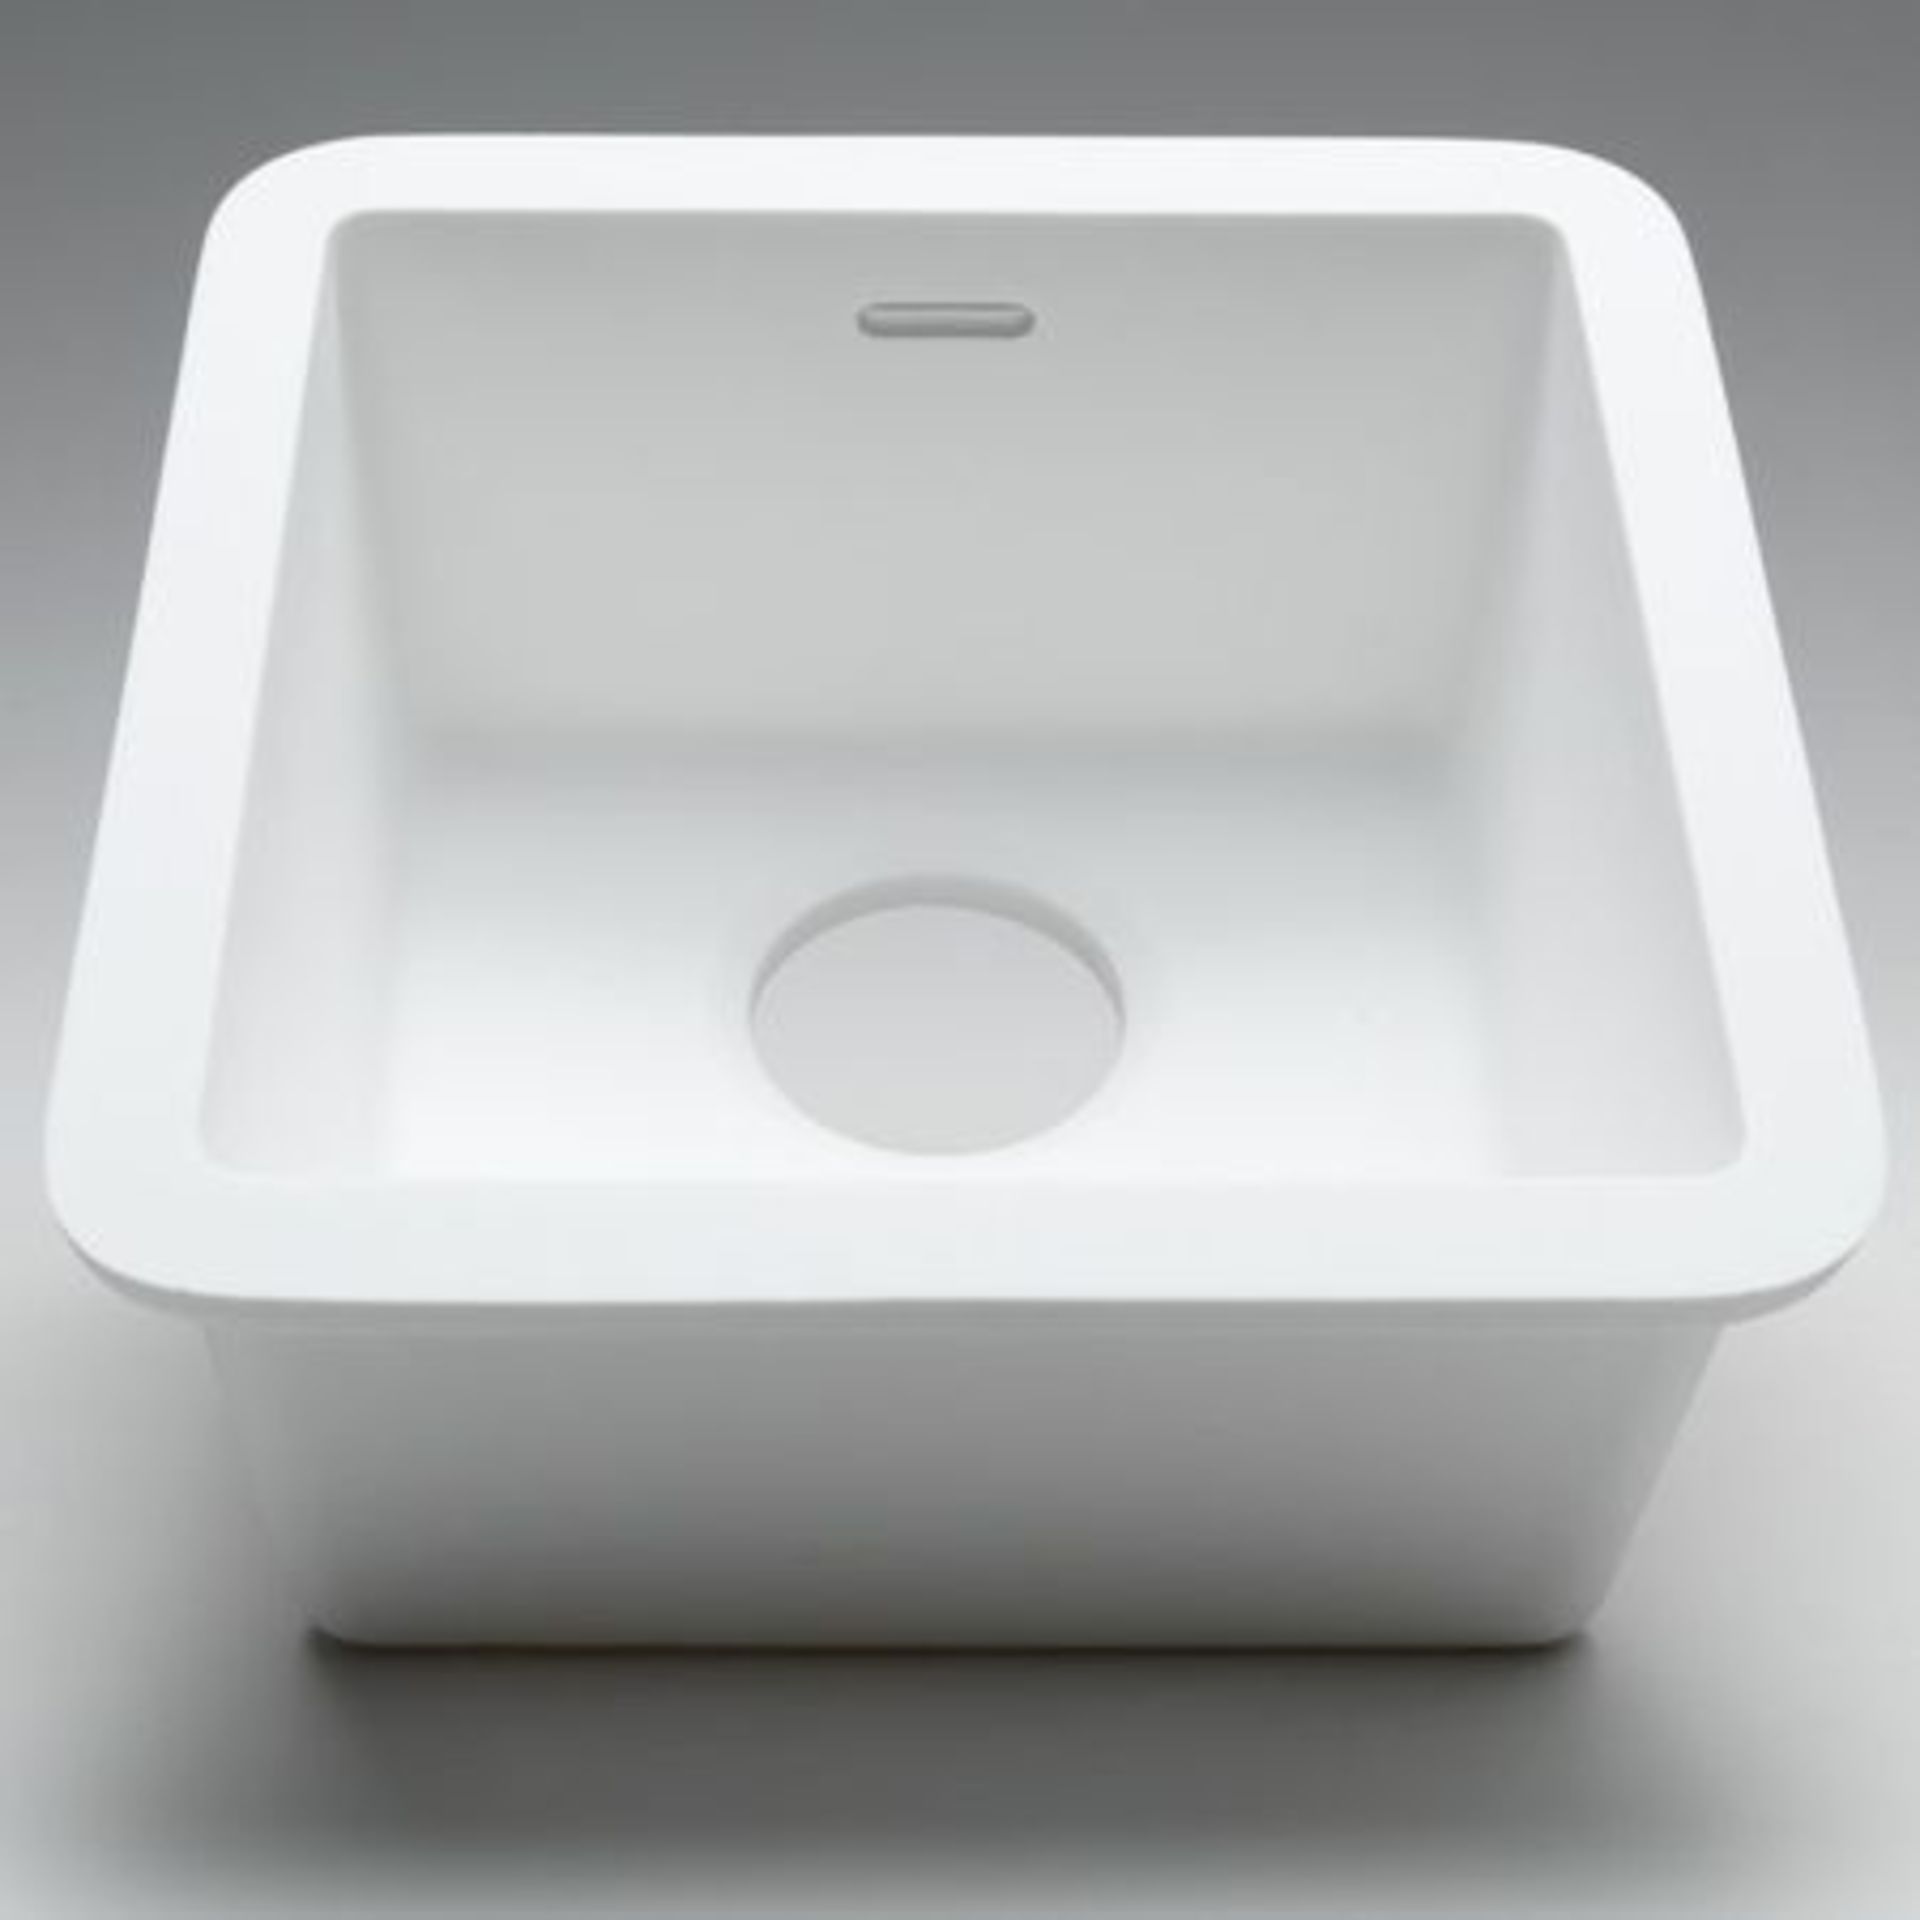 New Porcelanosa Sink Basic C605 1100 E 30x30 100139303. Systempool, Krion. Size, Cm 30x30 Col... New